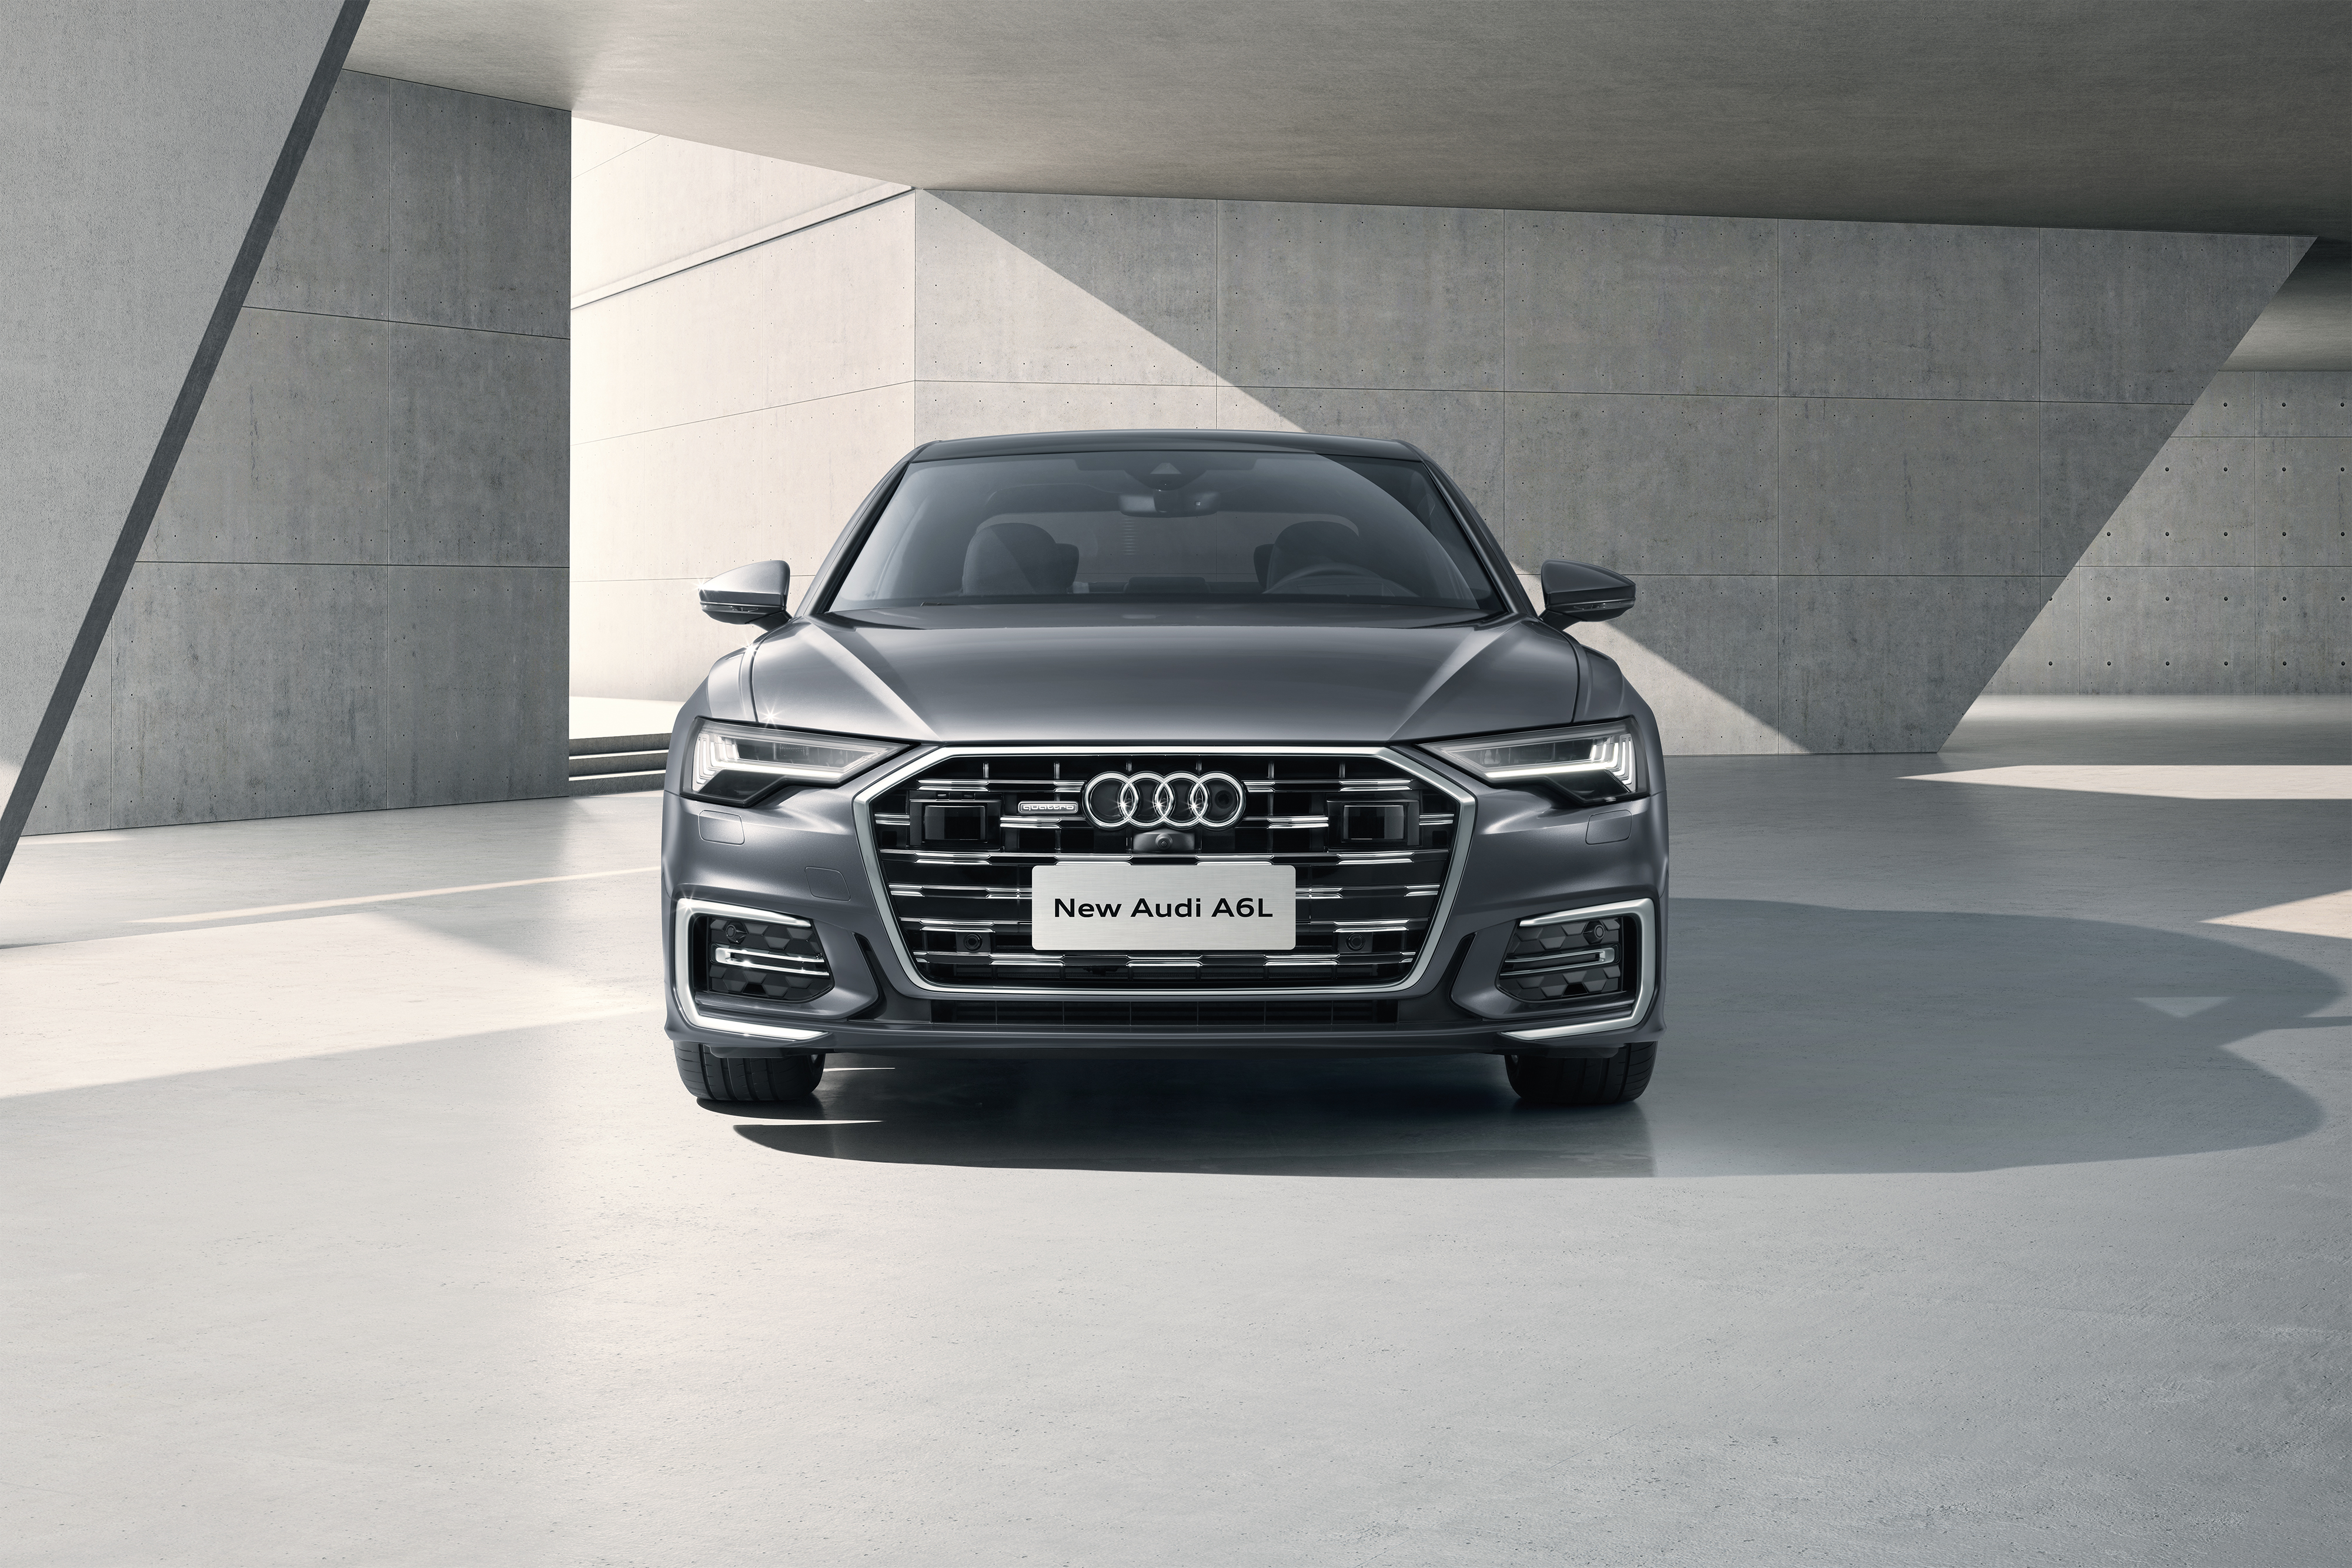 Vehicles Audi A6 HD Wallpaper | Background Image